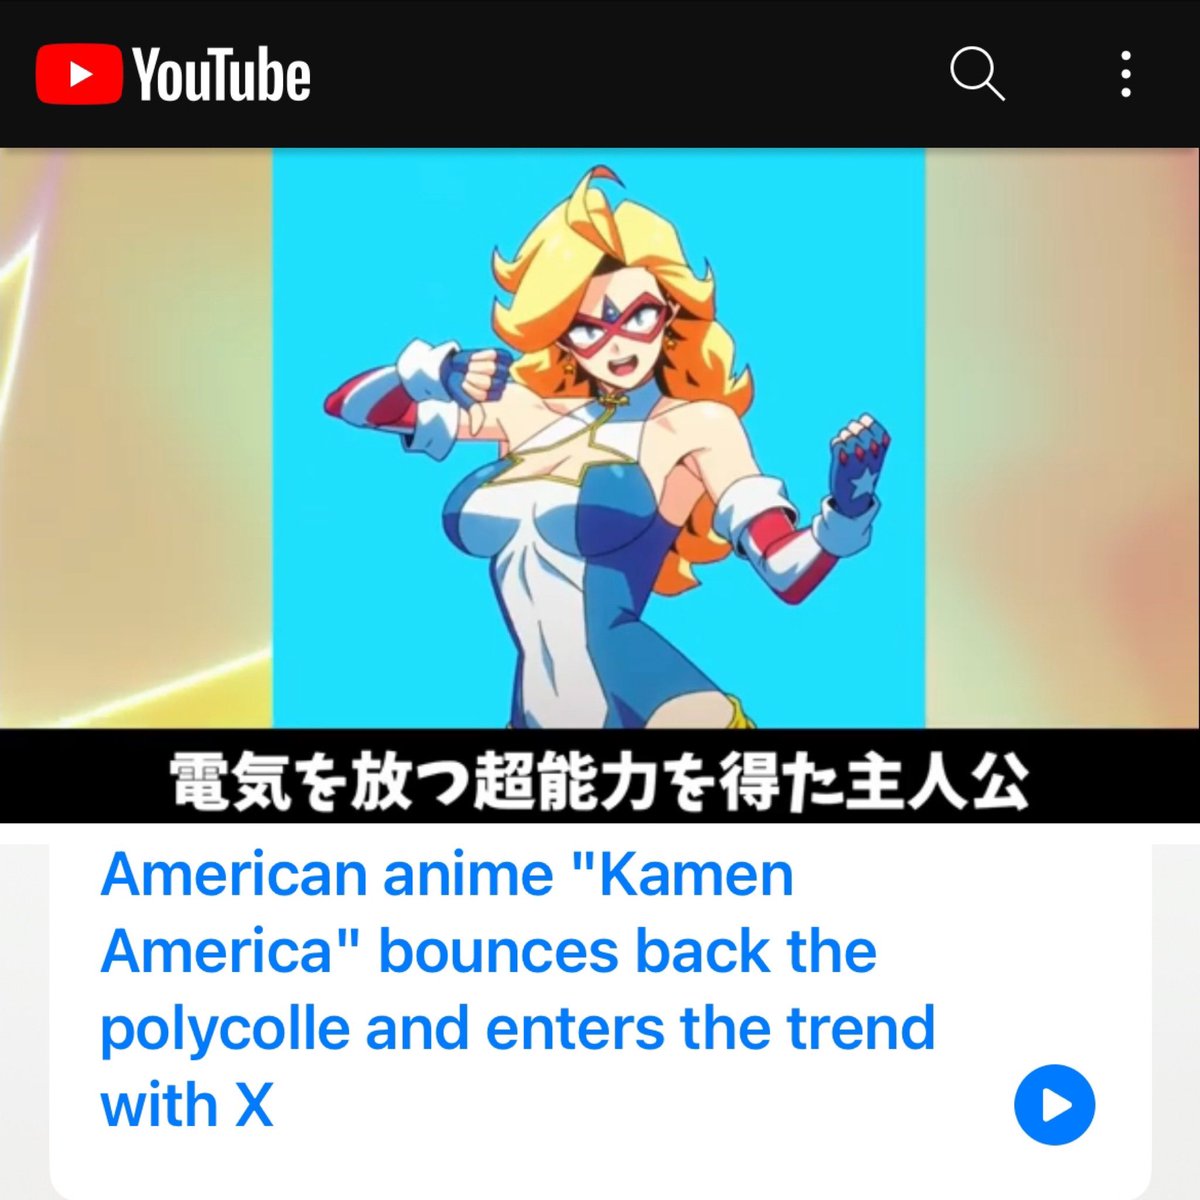 Several Japanese YouTubers have been discussing Kamen America as being an exception to current American media trends. We appreciate the encouragement! Nothing will change since we are completely independent.✌🏻 youtu.be/-jaWhyKPhqw?si…